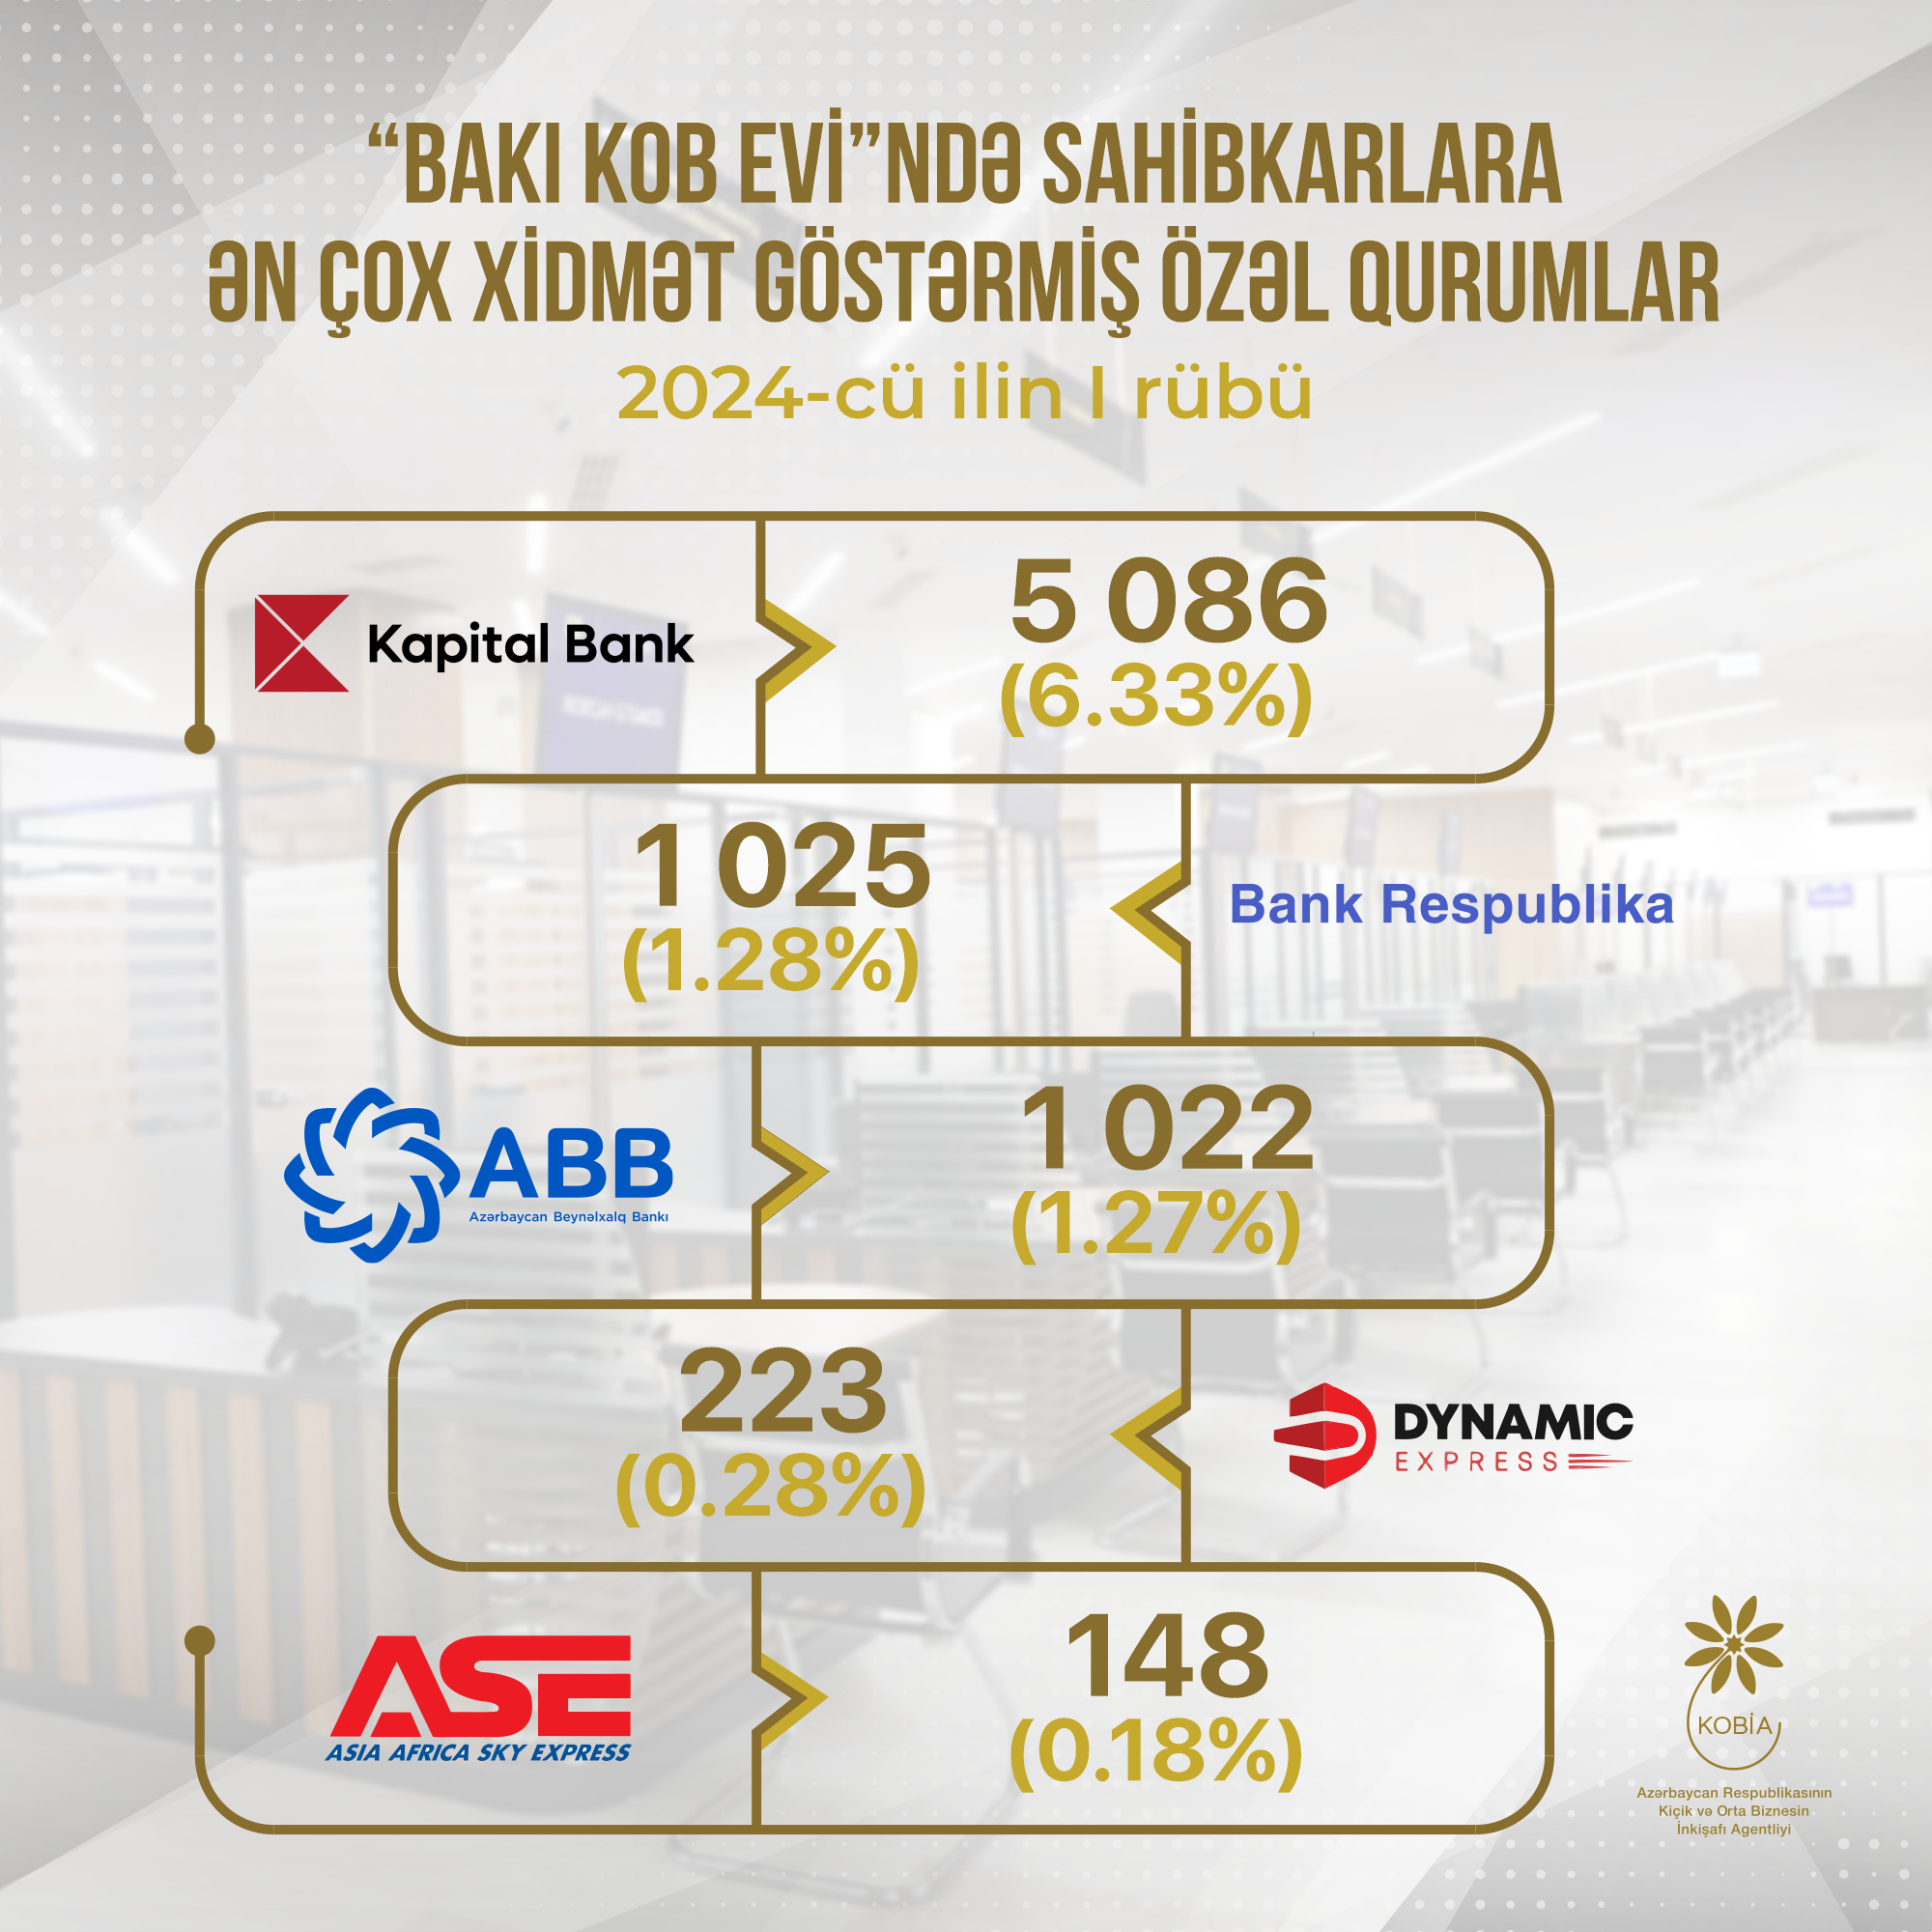 About 8 thousand B2B services were rendered to entrepreneurs in the “Baku SMB House”